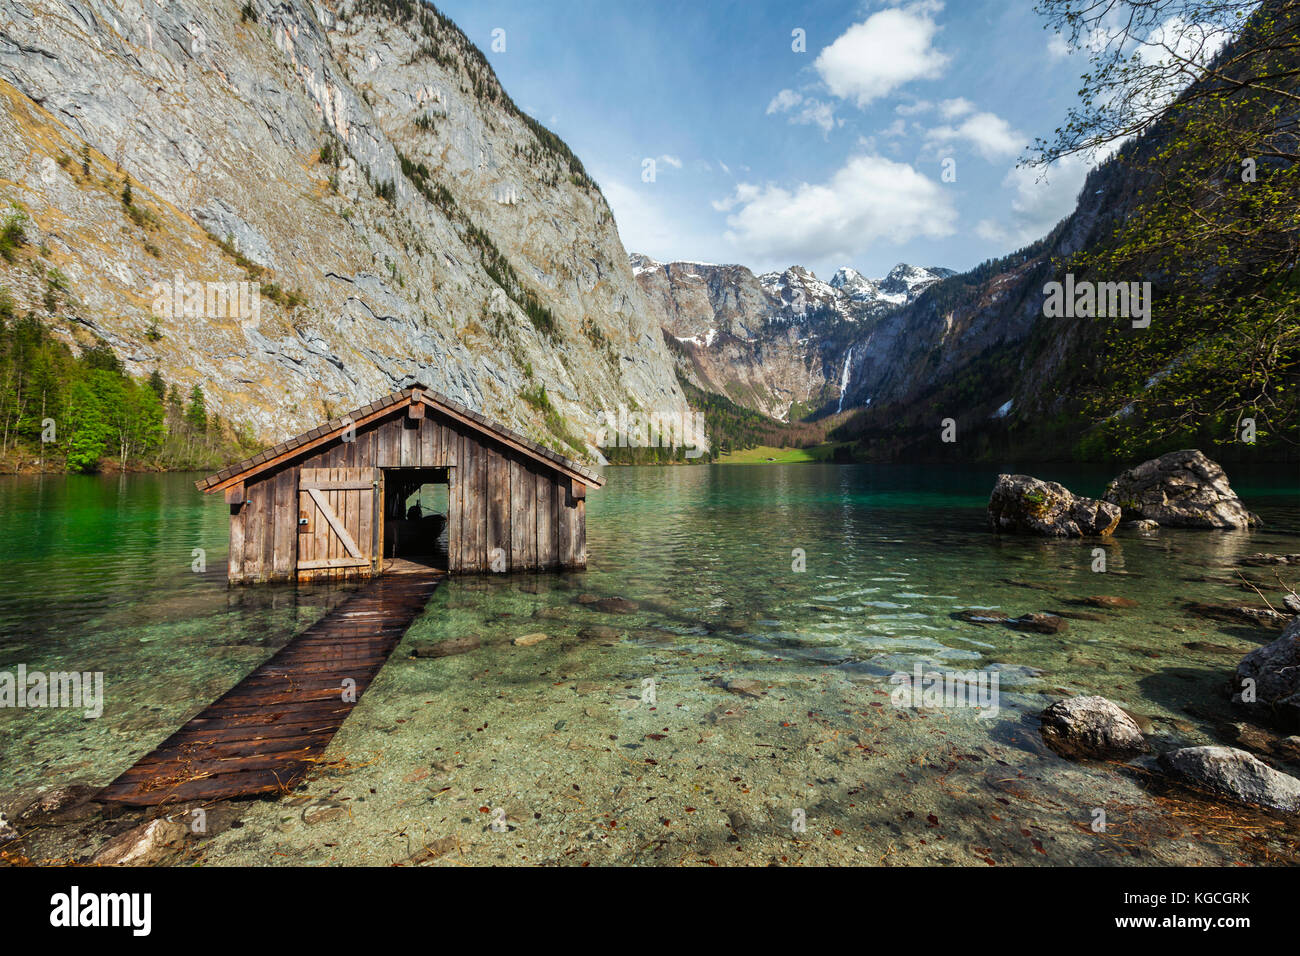 Boat shed on Obersee lake. Bavaria, Germany Stock Photo